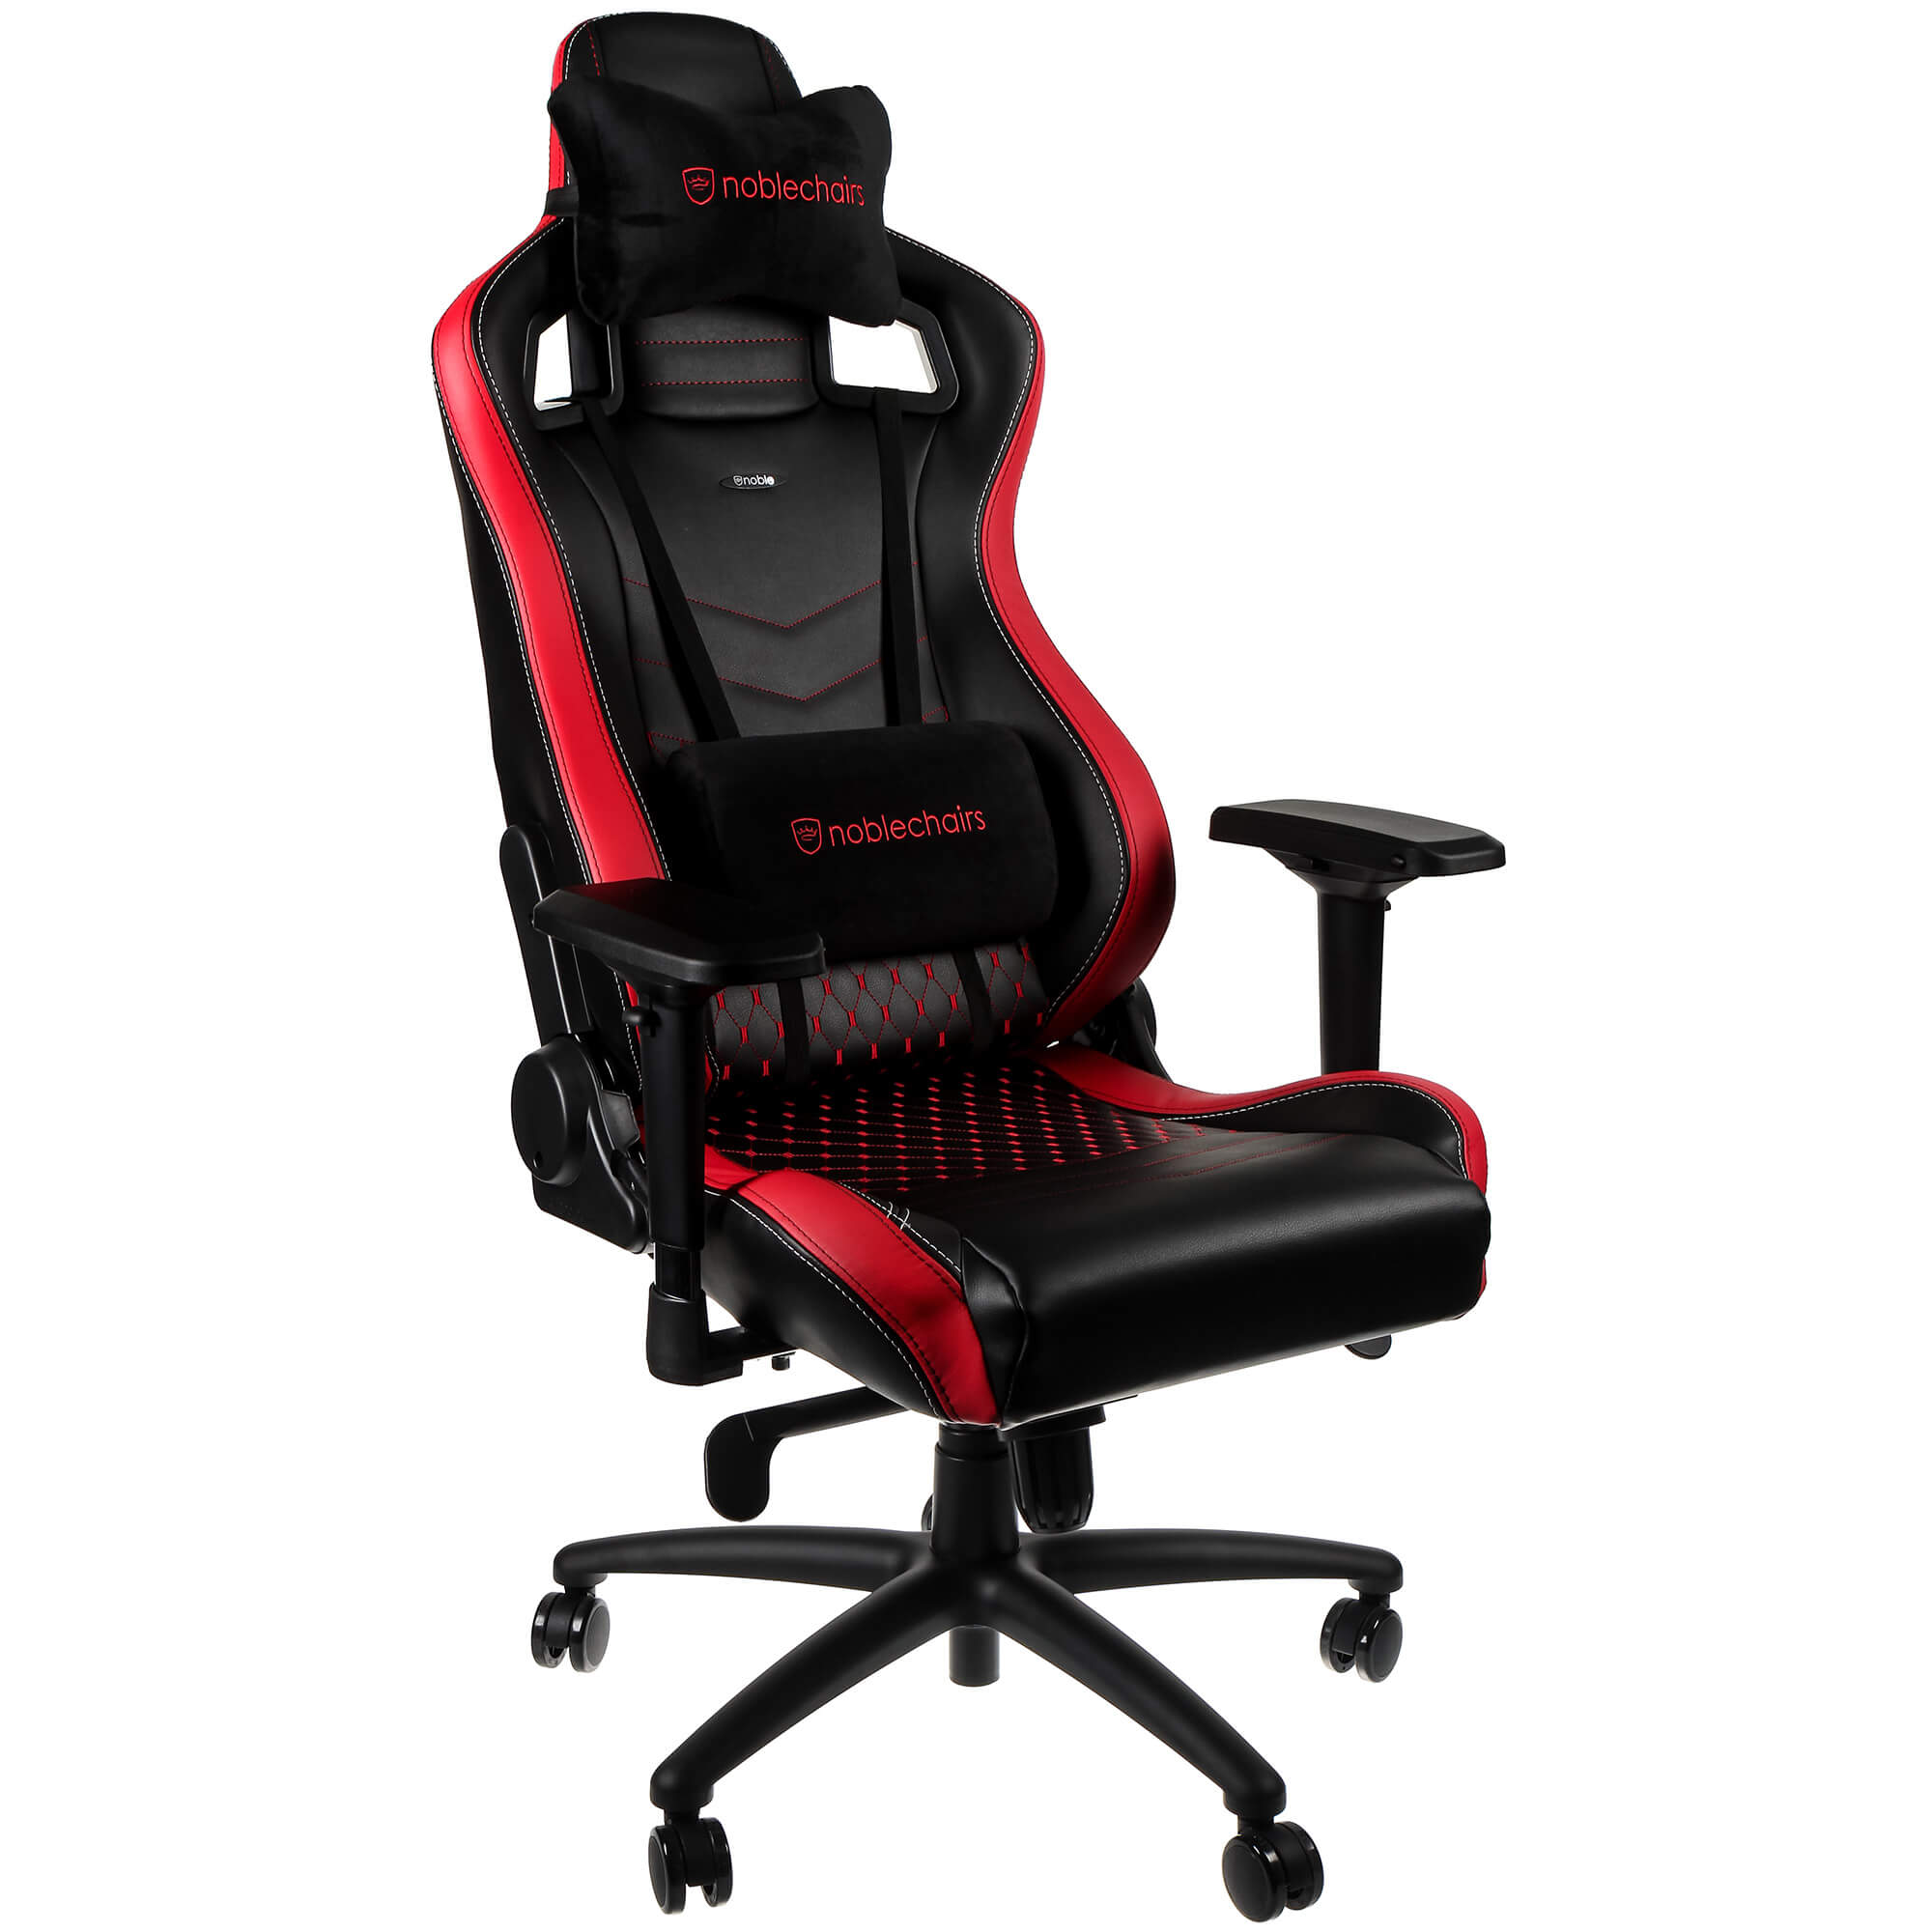 noblechairs - ** B Grade ** Silla noblechairs EPIC PU Leather mousesports Edition Negro / Rojo